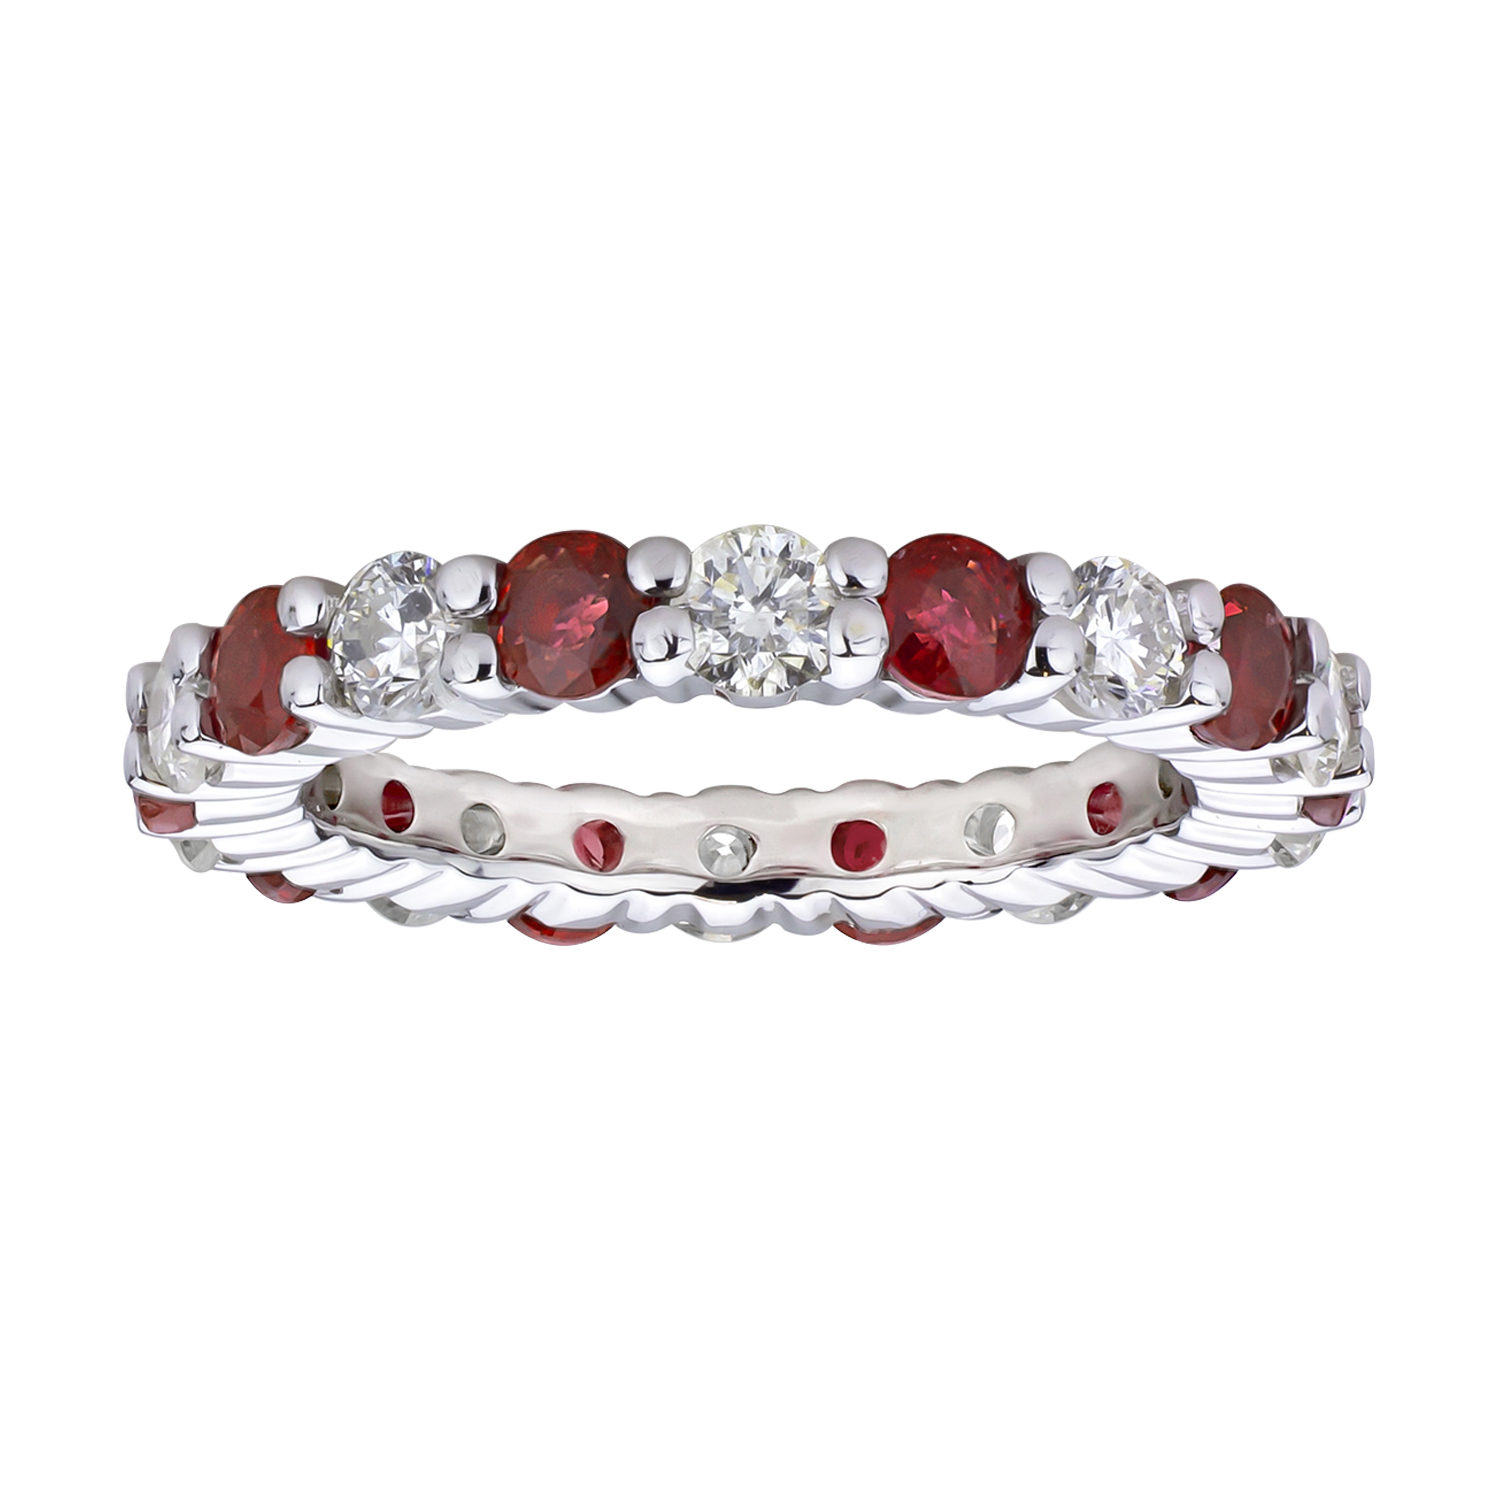 View 2.20cttw Diamond and Natural Heated Ruby Eternity Band set in 14k Gold